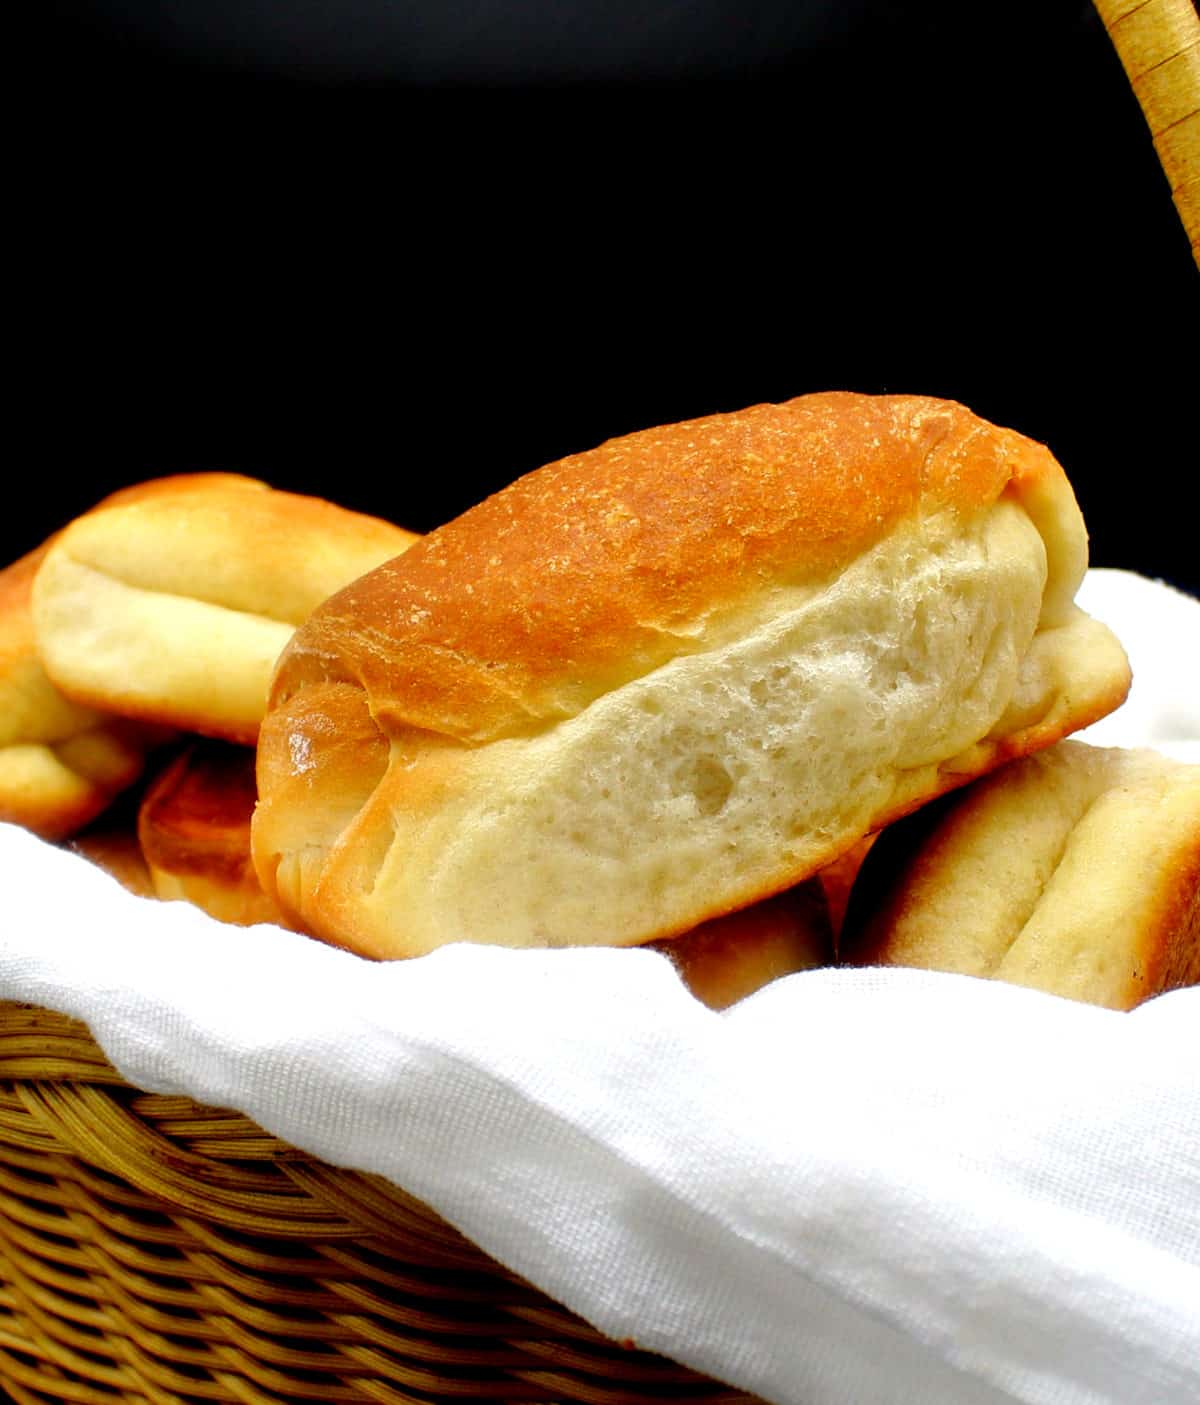 Vegan Parker House rolls nestled in a bread basket lined with a white flour sack cloth.